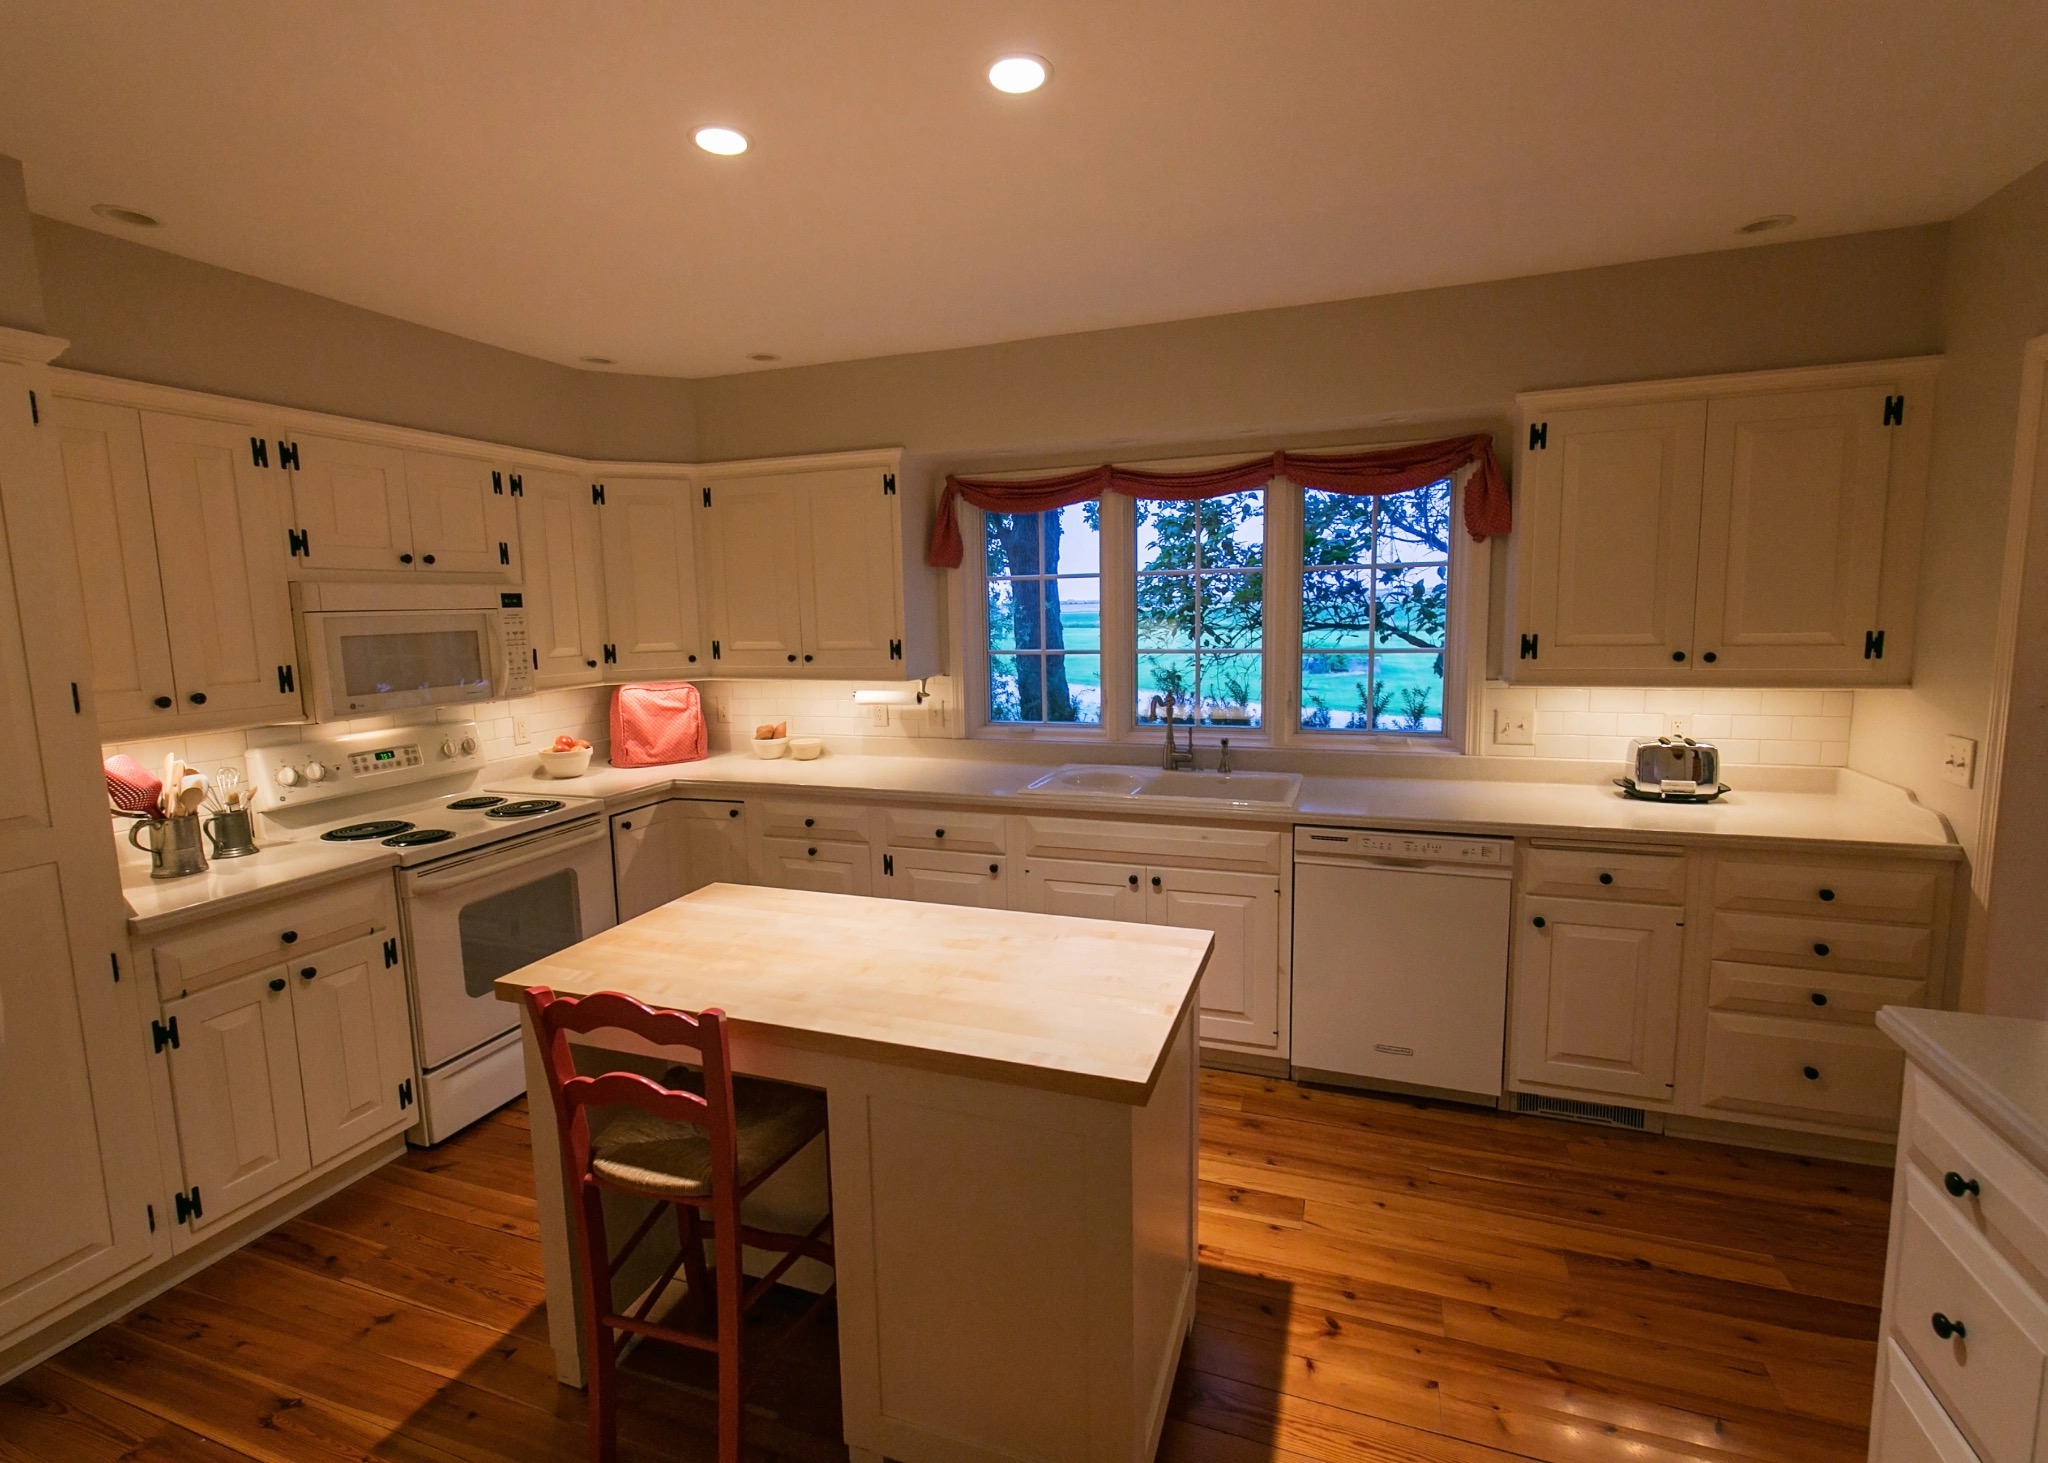 A photograph of a well-lit kitchen featuring lights underneath the cabinets and ceiling lights directly over the island. The cabinets are white with dark handles and the floor is hardwood.